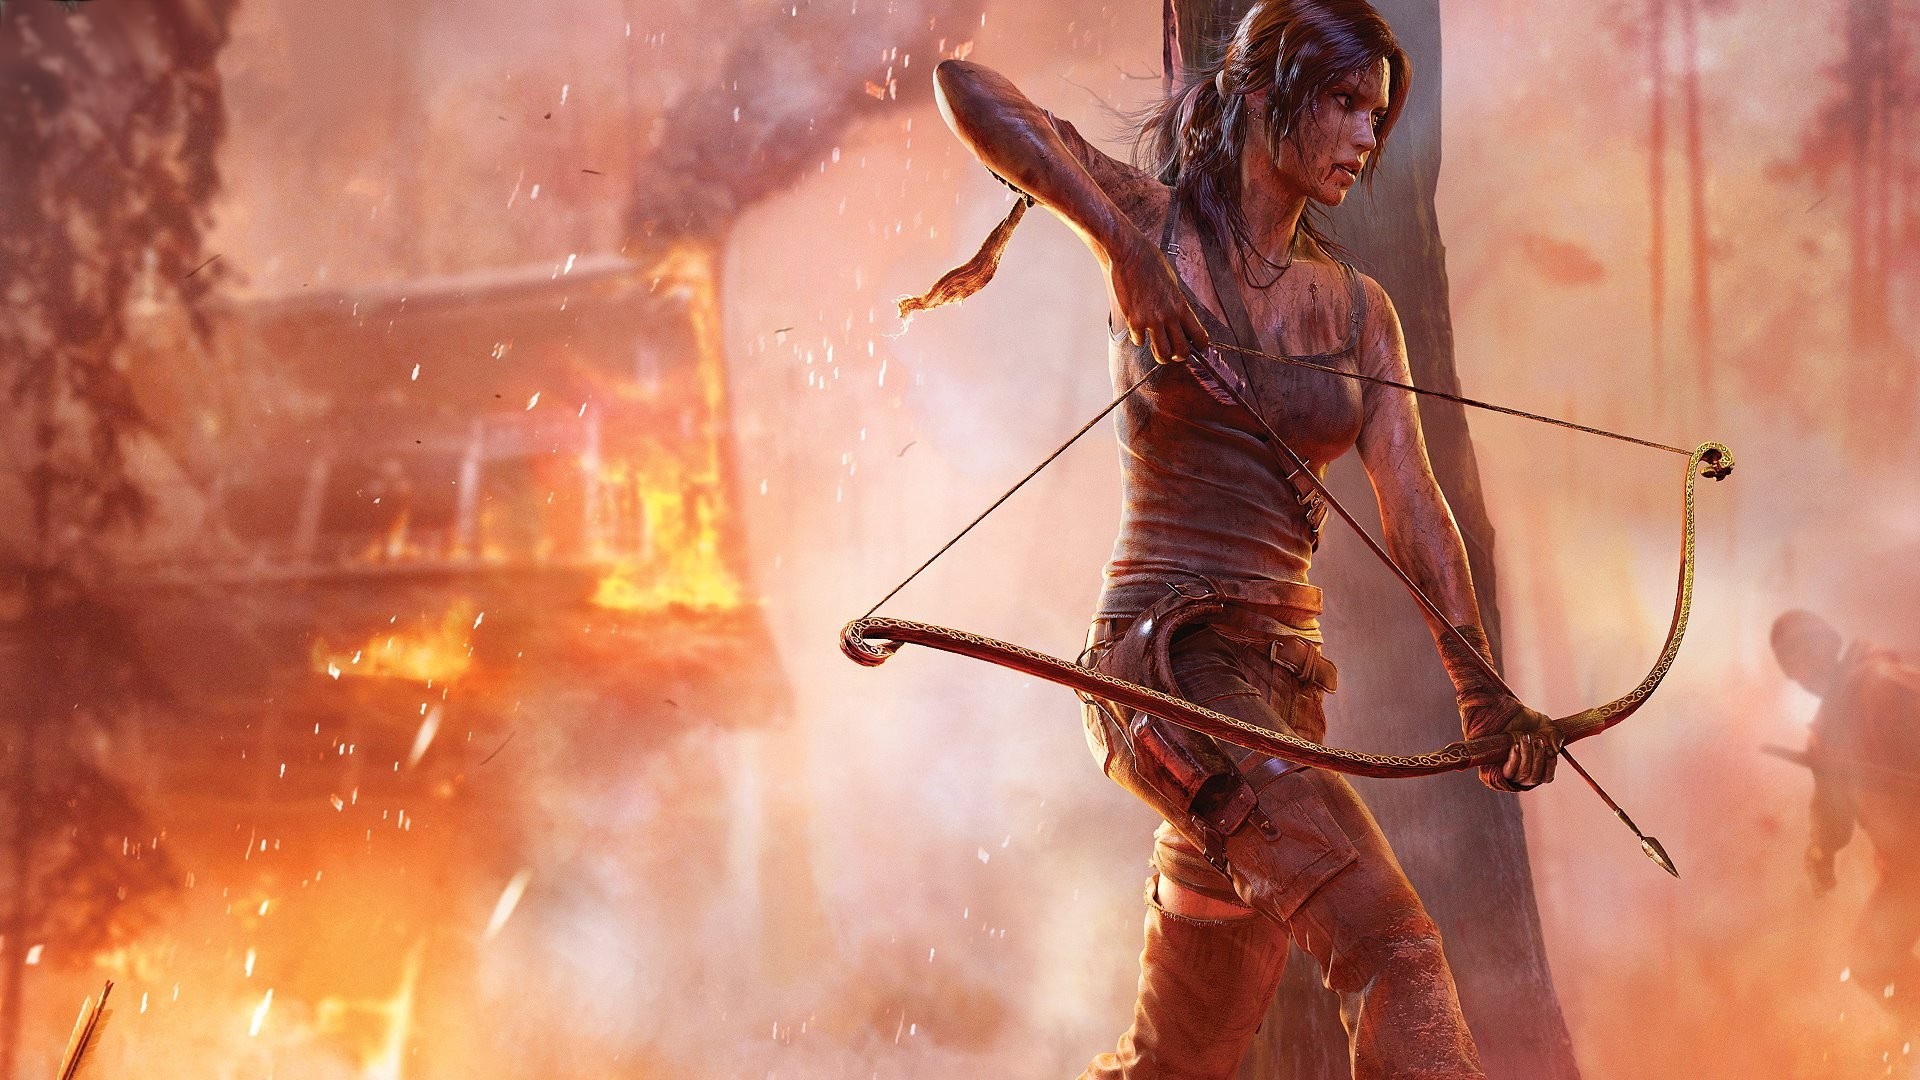 General 1920x1080 Tomb Raider video games video game art fire Video Game Heroes video game girls bow Lara Croft (Tomb Raider) bow and arrow burning video game characters